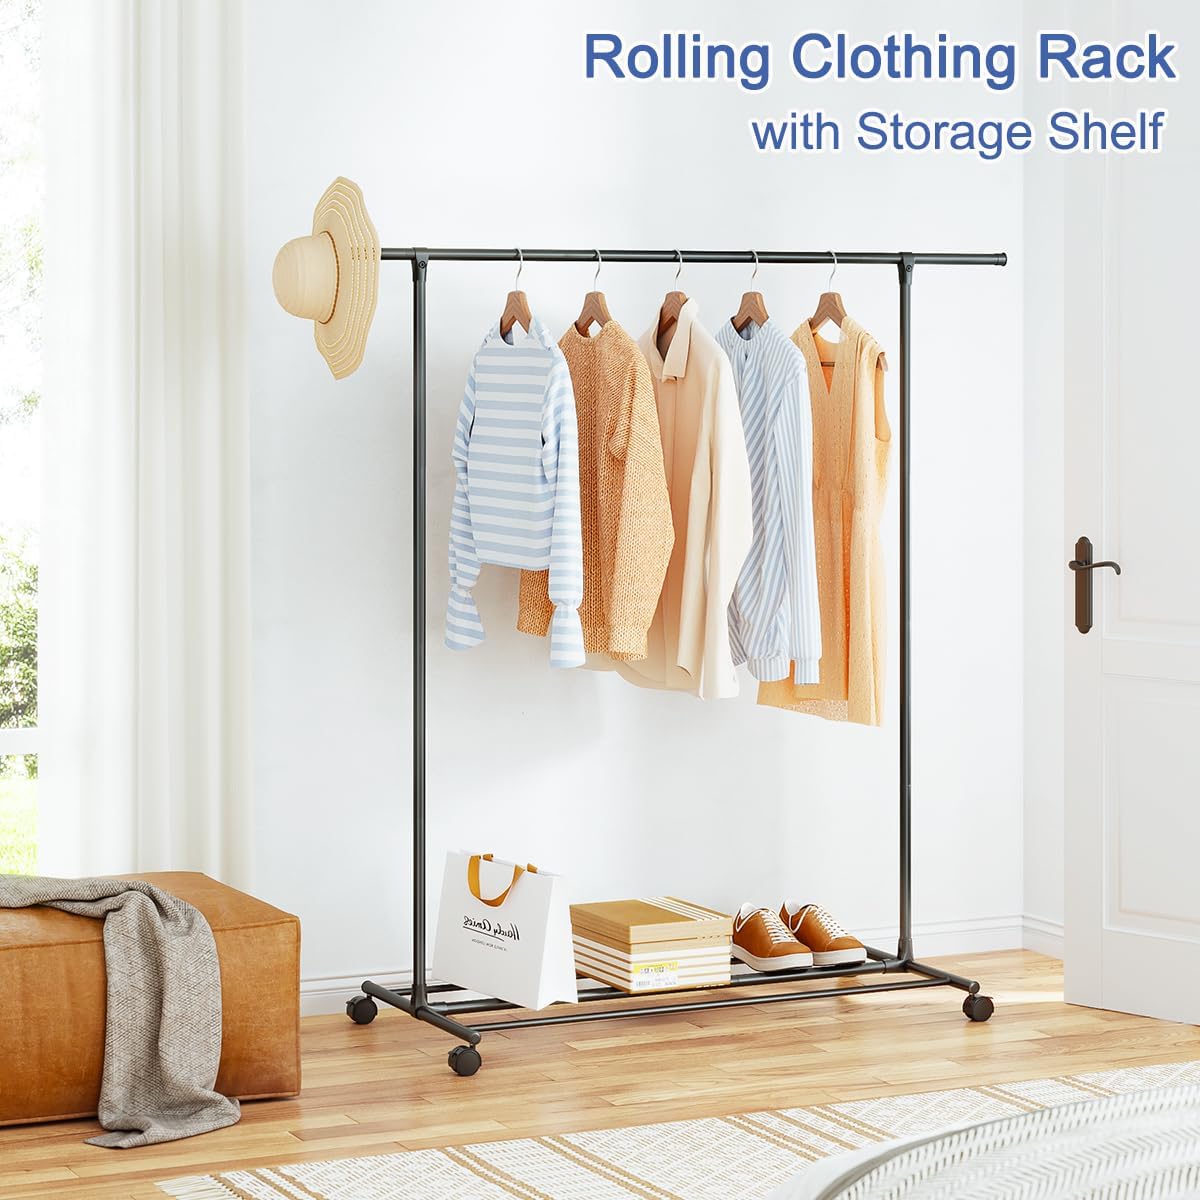 FANHAO Clothes Rack with Wheels, Stainless Steel Garment Rack with Bottom Shelf, Matte Black